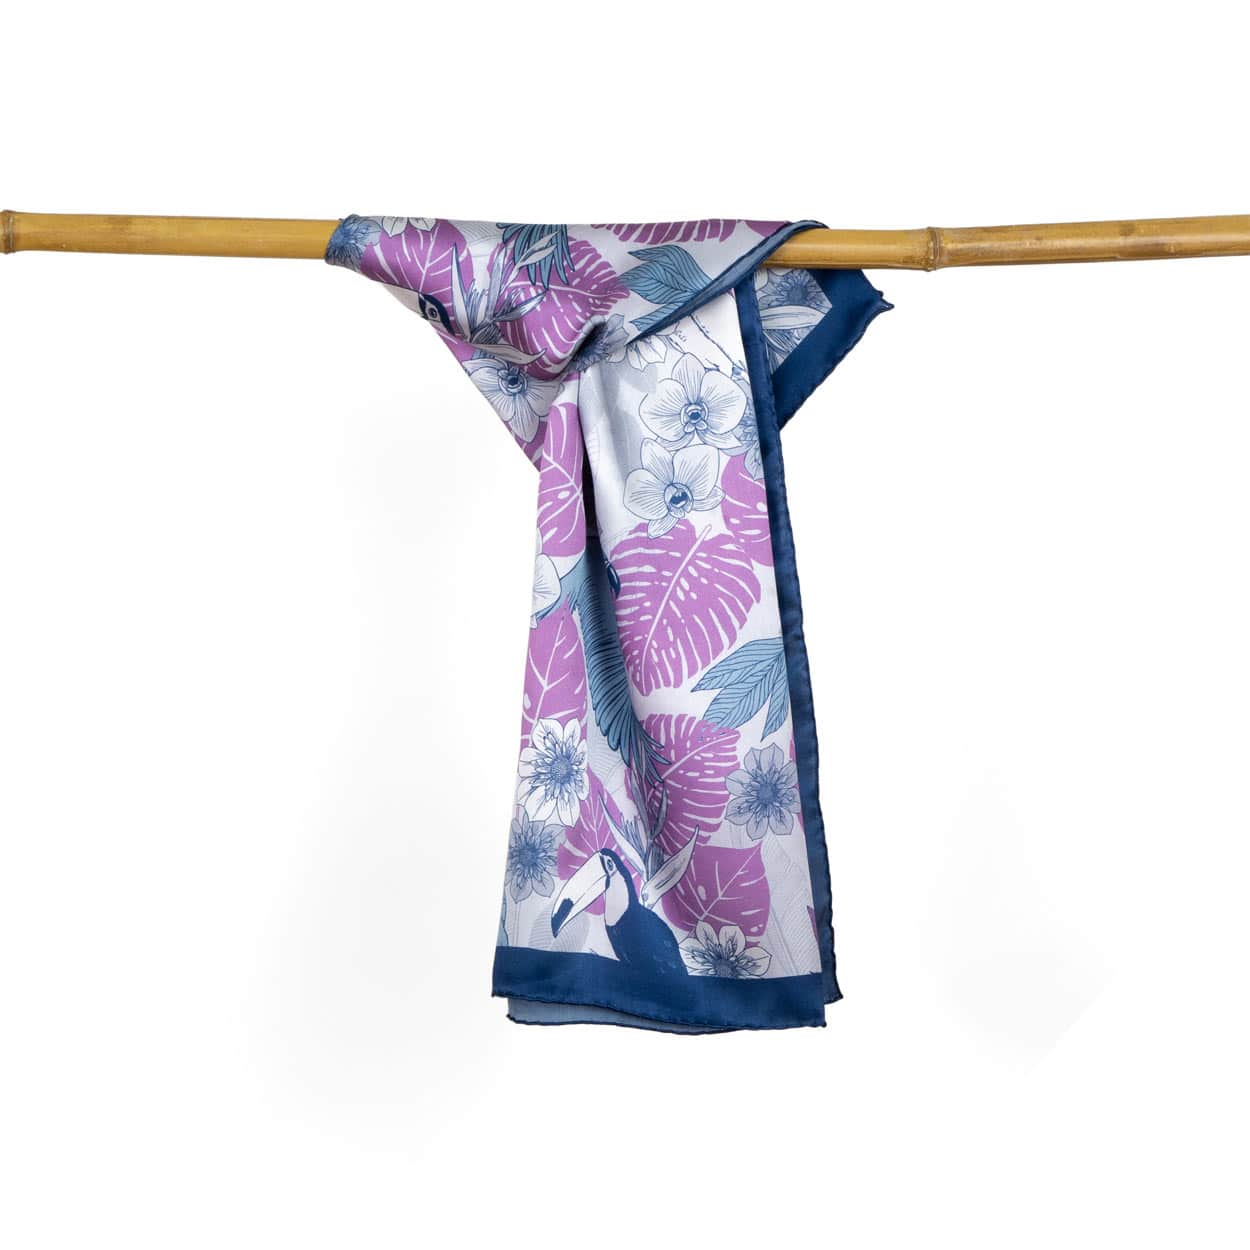 Silk scarf with tropical print in purple and blue tones